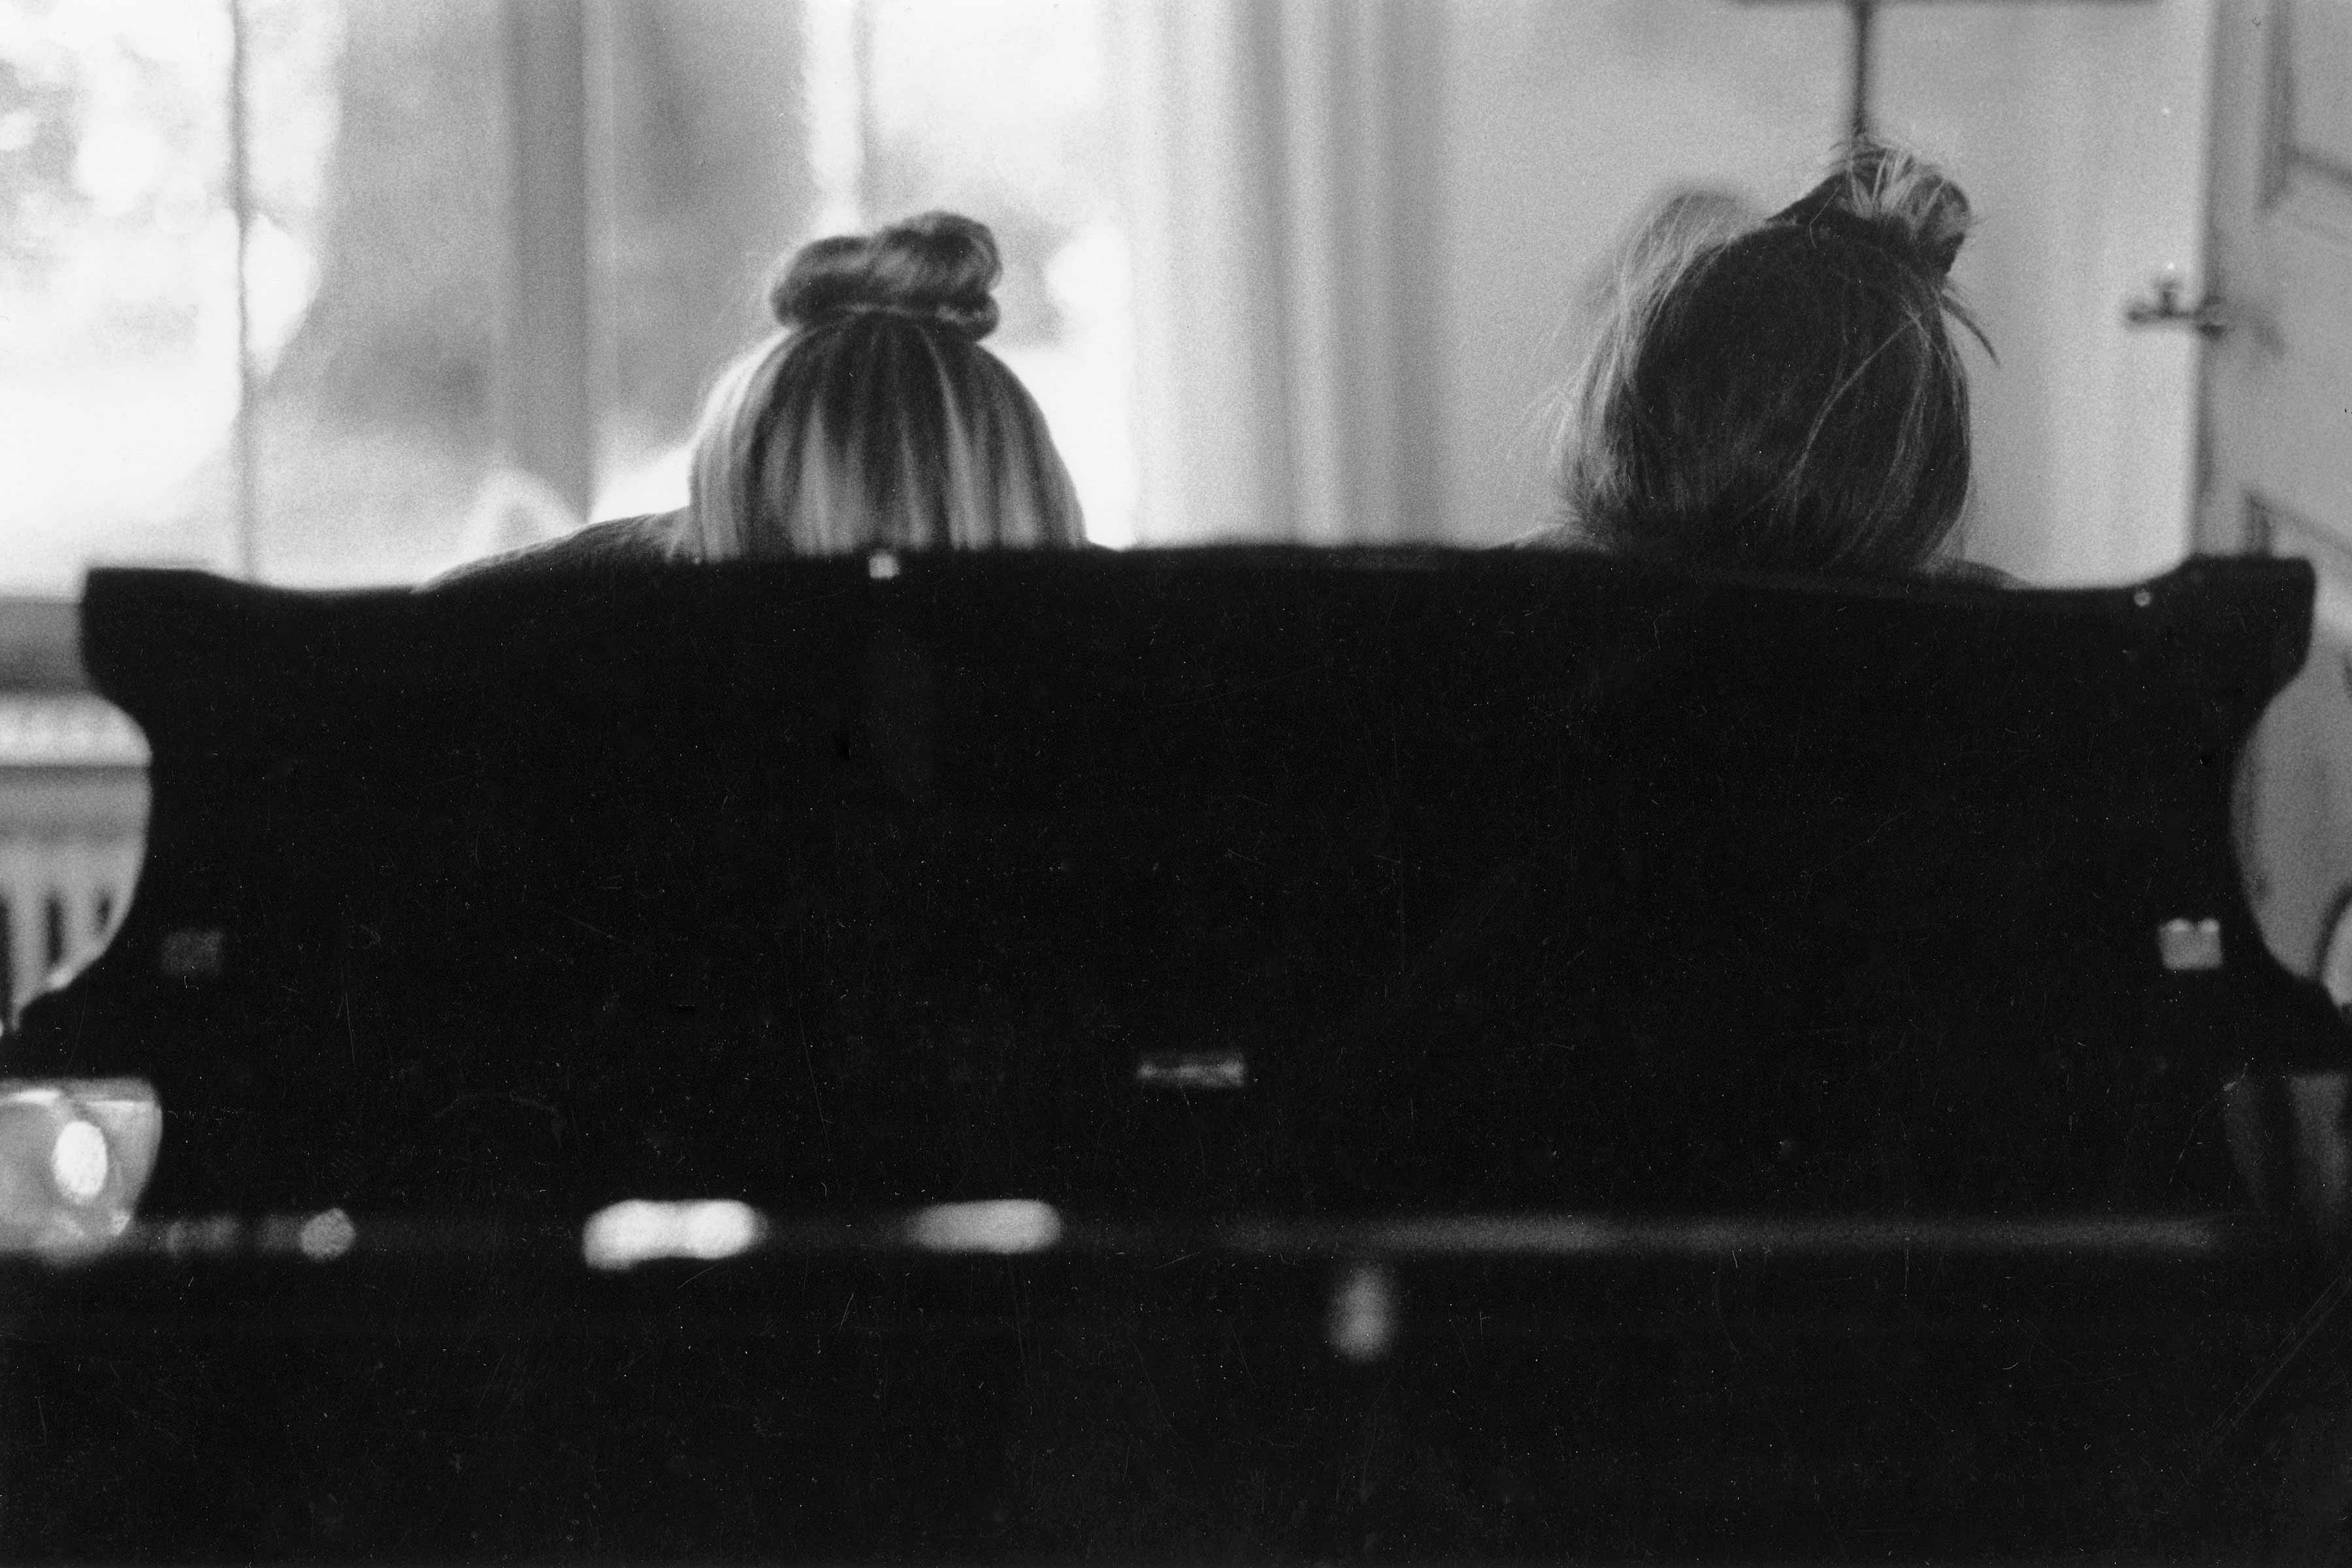 Eva 15 years old playing piano with her sister and showing just the top of their heads behind the piano